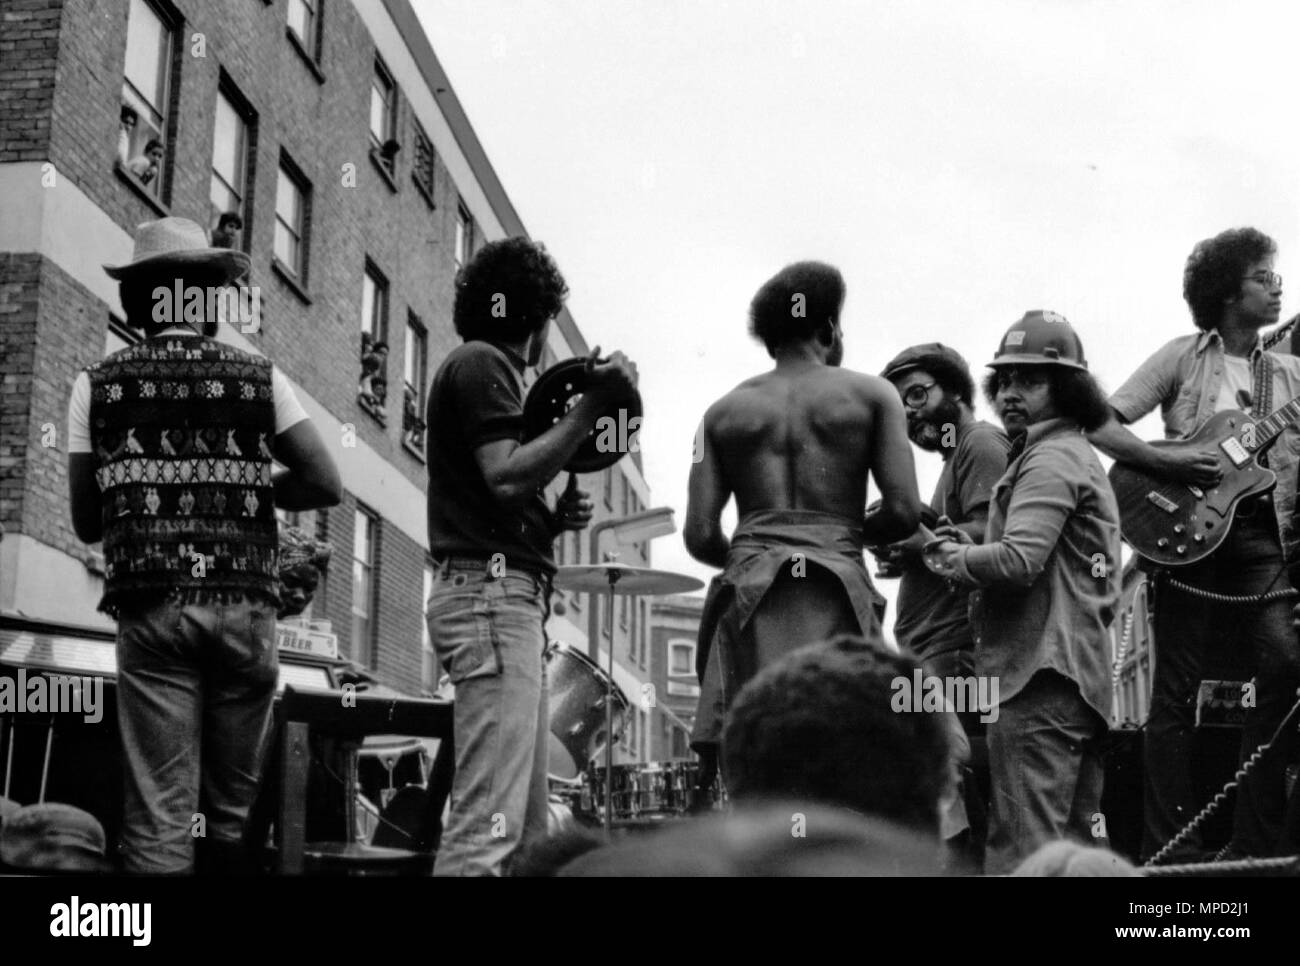 The Notting Hill Carnival in the streets of West London in 1976, the largest street festival in Europe. In this photo are The Iron Men who often play at J'ouvert, a large street party in Trinidad. Great history of the Carnival images. Stock Photo